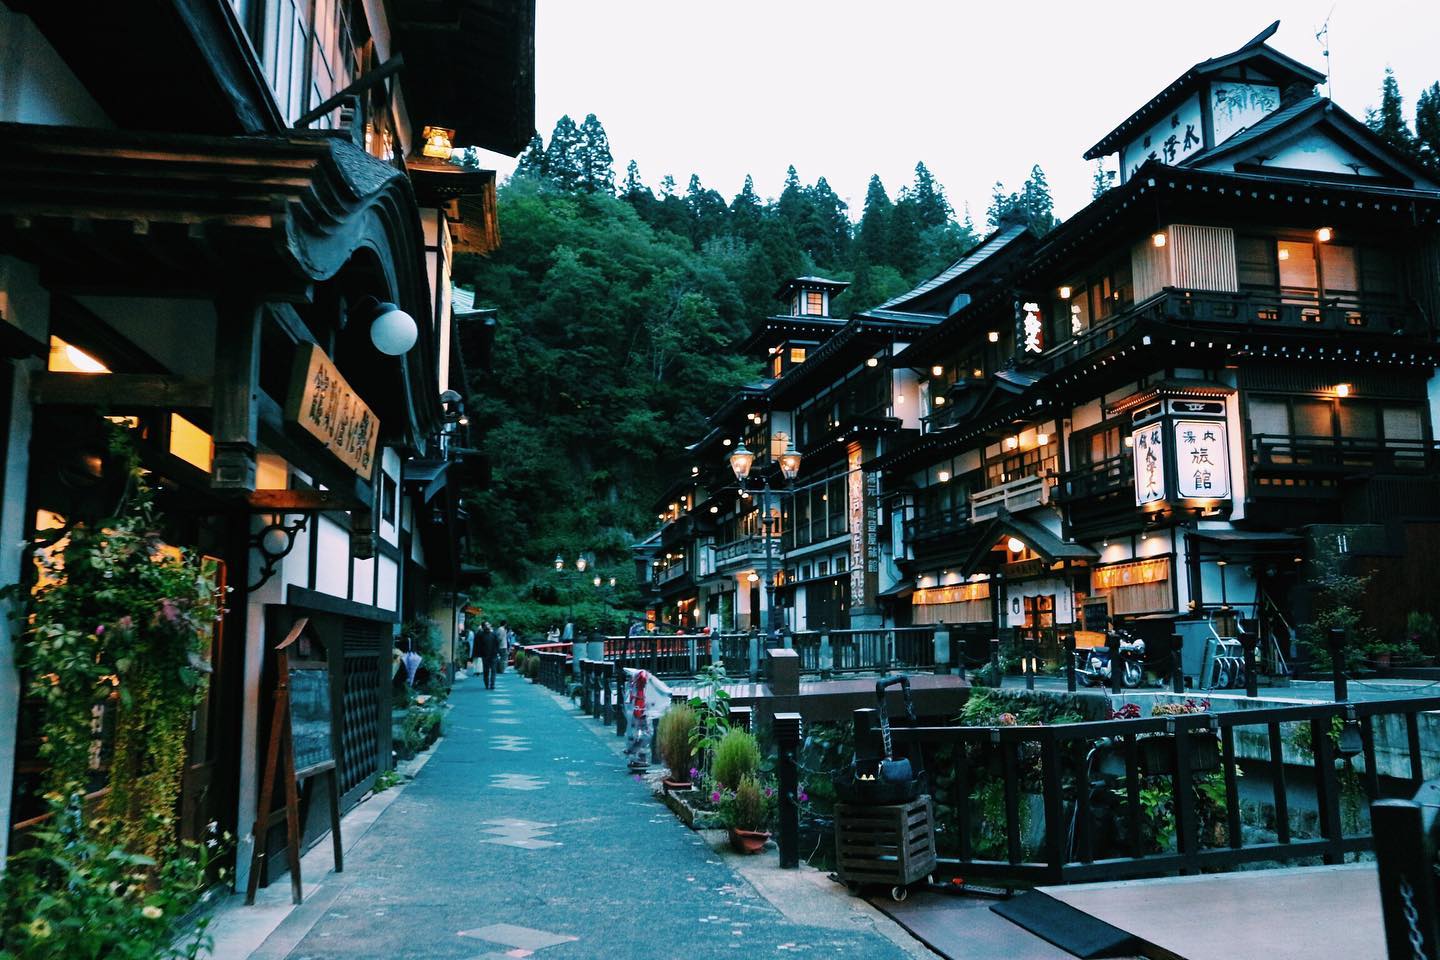 Here's this week's update of from AOI Global at Ginzan Onsen in Yamagata Prefecture! (Photo taken pre Covid-19)⁣
⁣
Located in the middle of the mountains, this small town with its traditionally styled wooden buildings is known to be one of the prettiest hot spring towns in Japan. The town evokes a nostalgic feeling, often making visitors feel like they have entered the mystical world of the movie Spirited Away.⁣
⁣
REMOTE SHOOT IN JAPAN with AOI Pro. Global!⁣⁣
Contact us for details through the link in the bio.⁣⁣
⁣⁣
#weeklyinspiration﻿